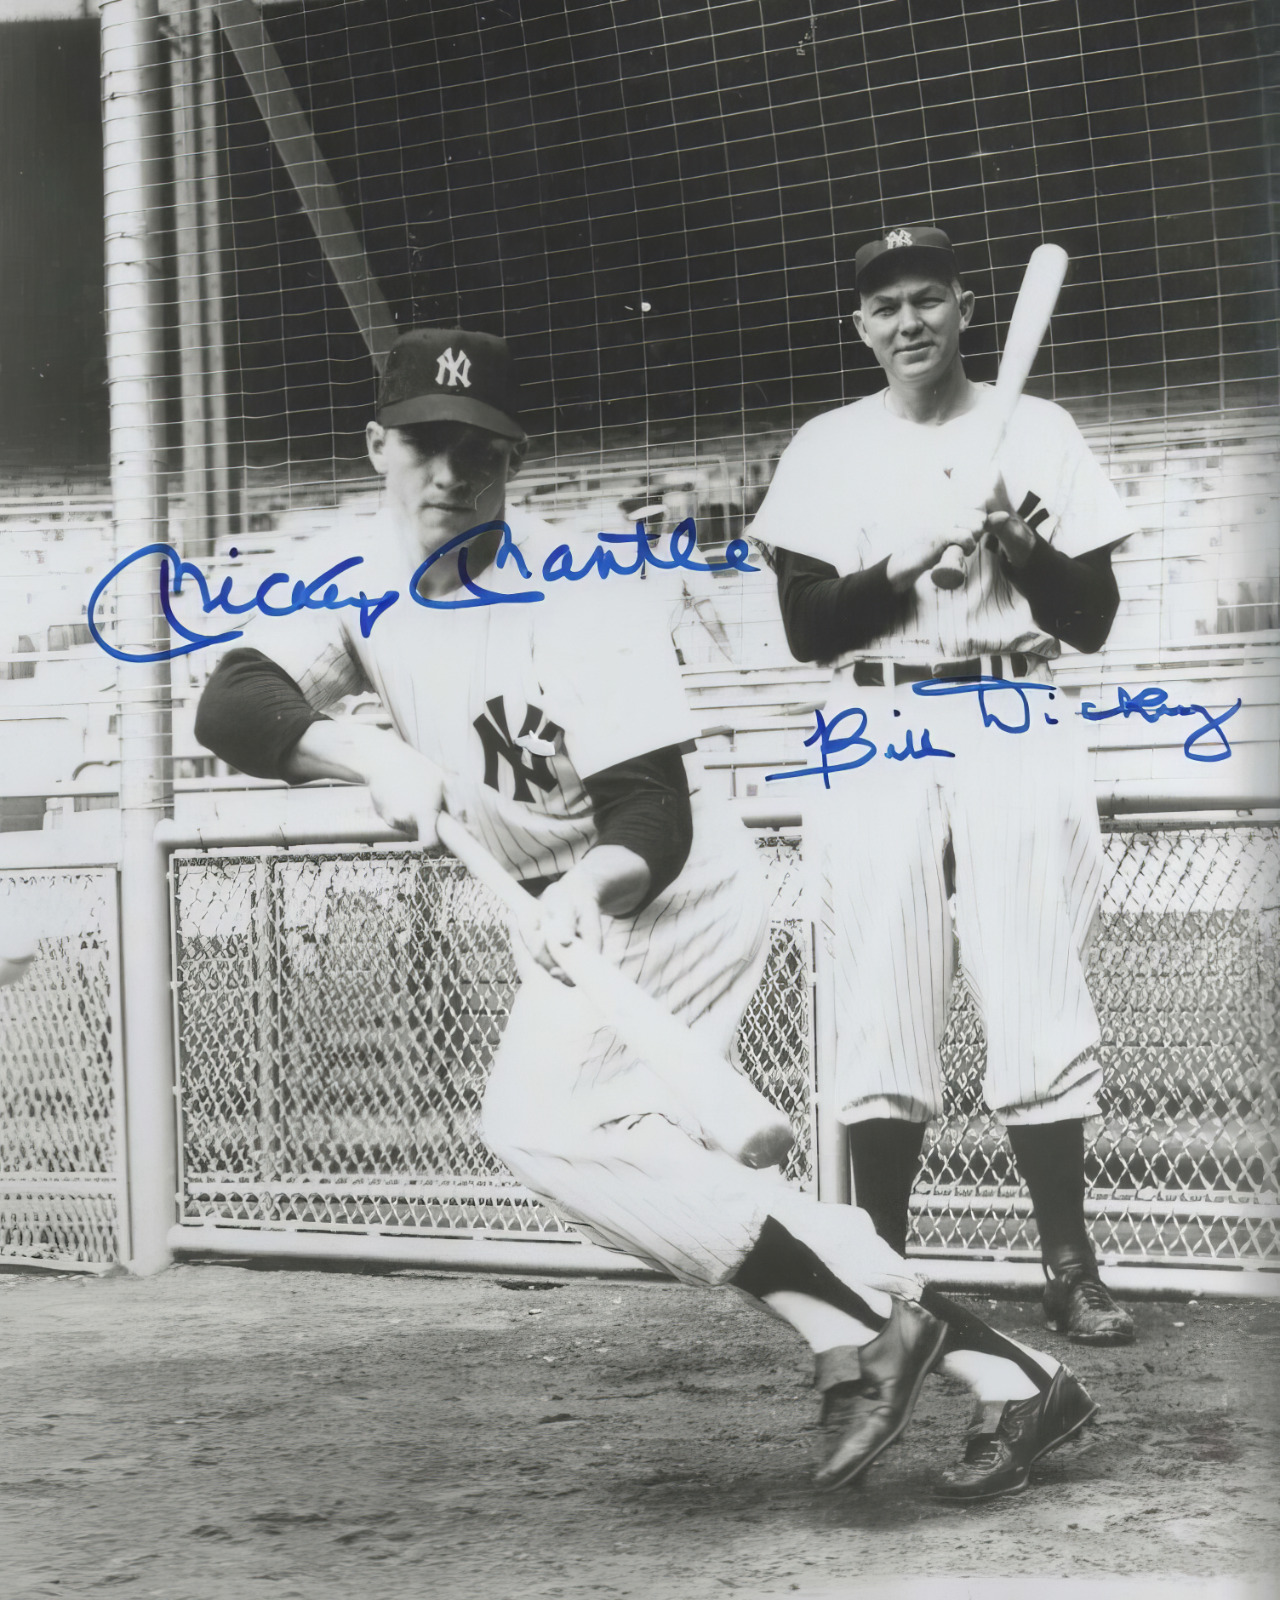 MICKEY MANTLE & BILL DICKEY BASEBALL PLAYERS AUTOGRAPHED 8X10 PHOTO REPRINT